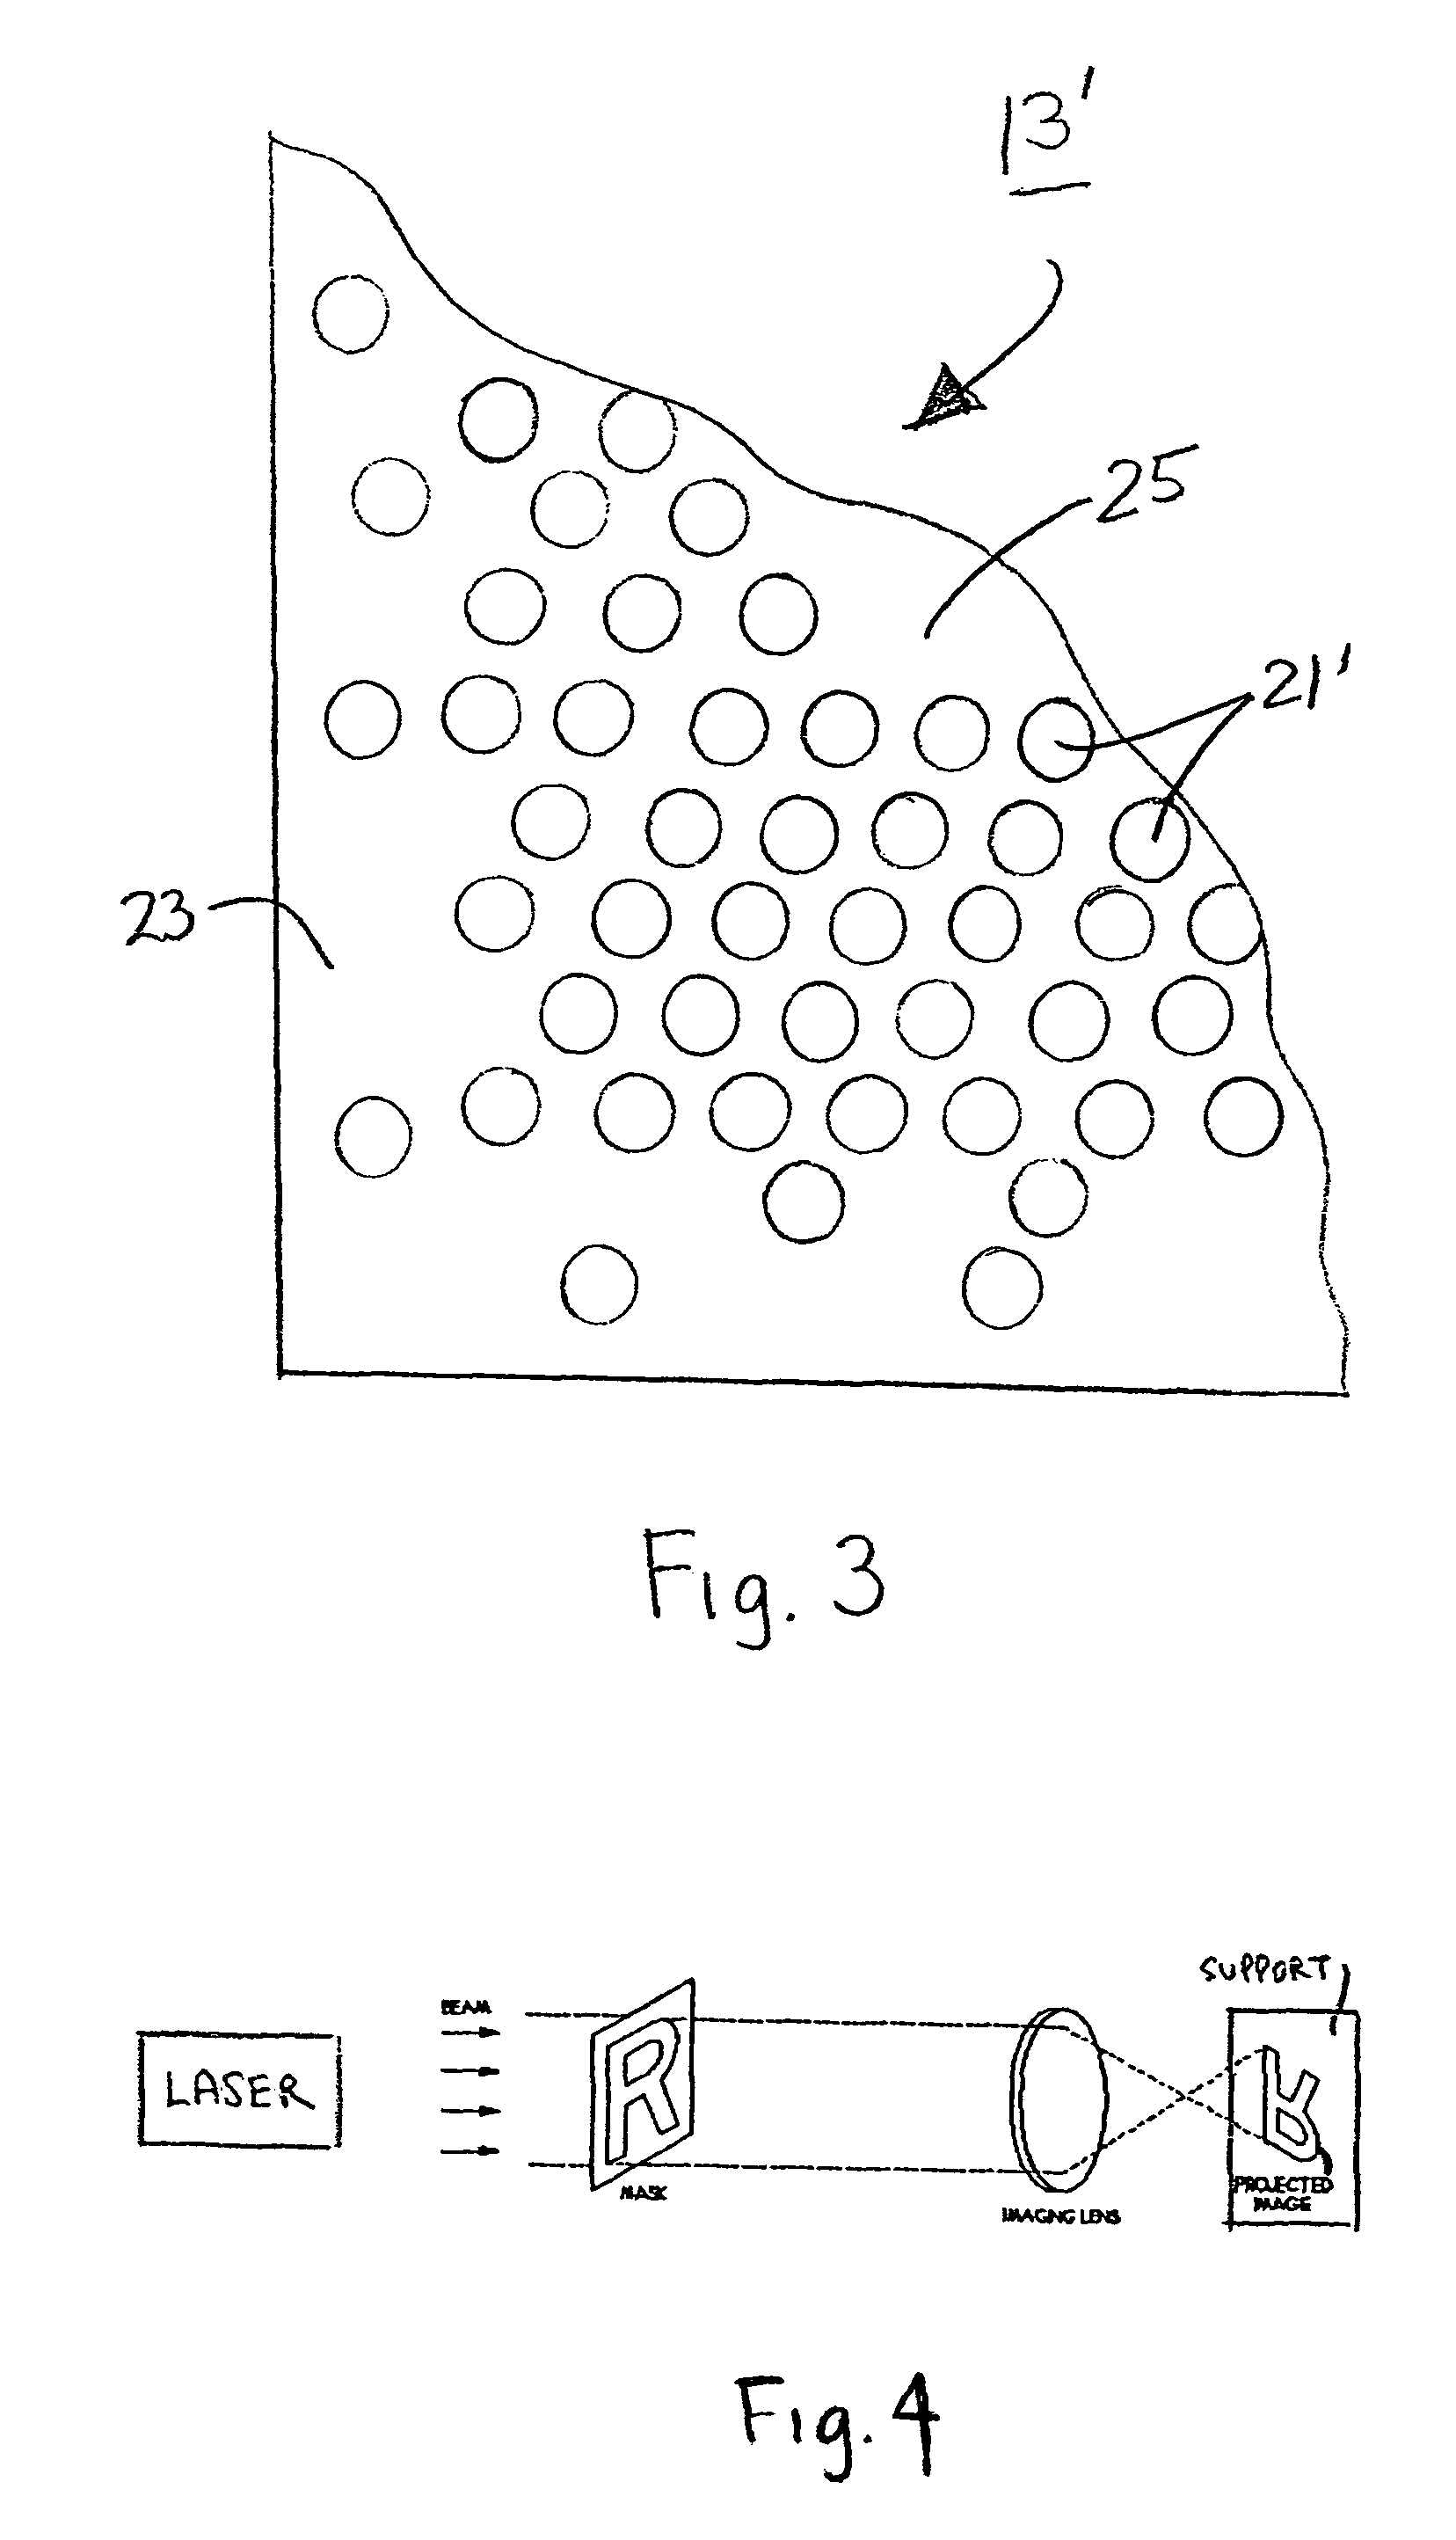 Solid polymer electrolyte composite membrane comprising porous ceramic support